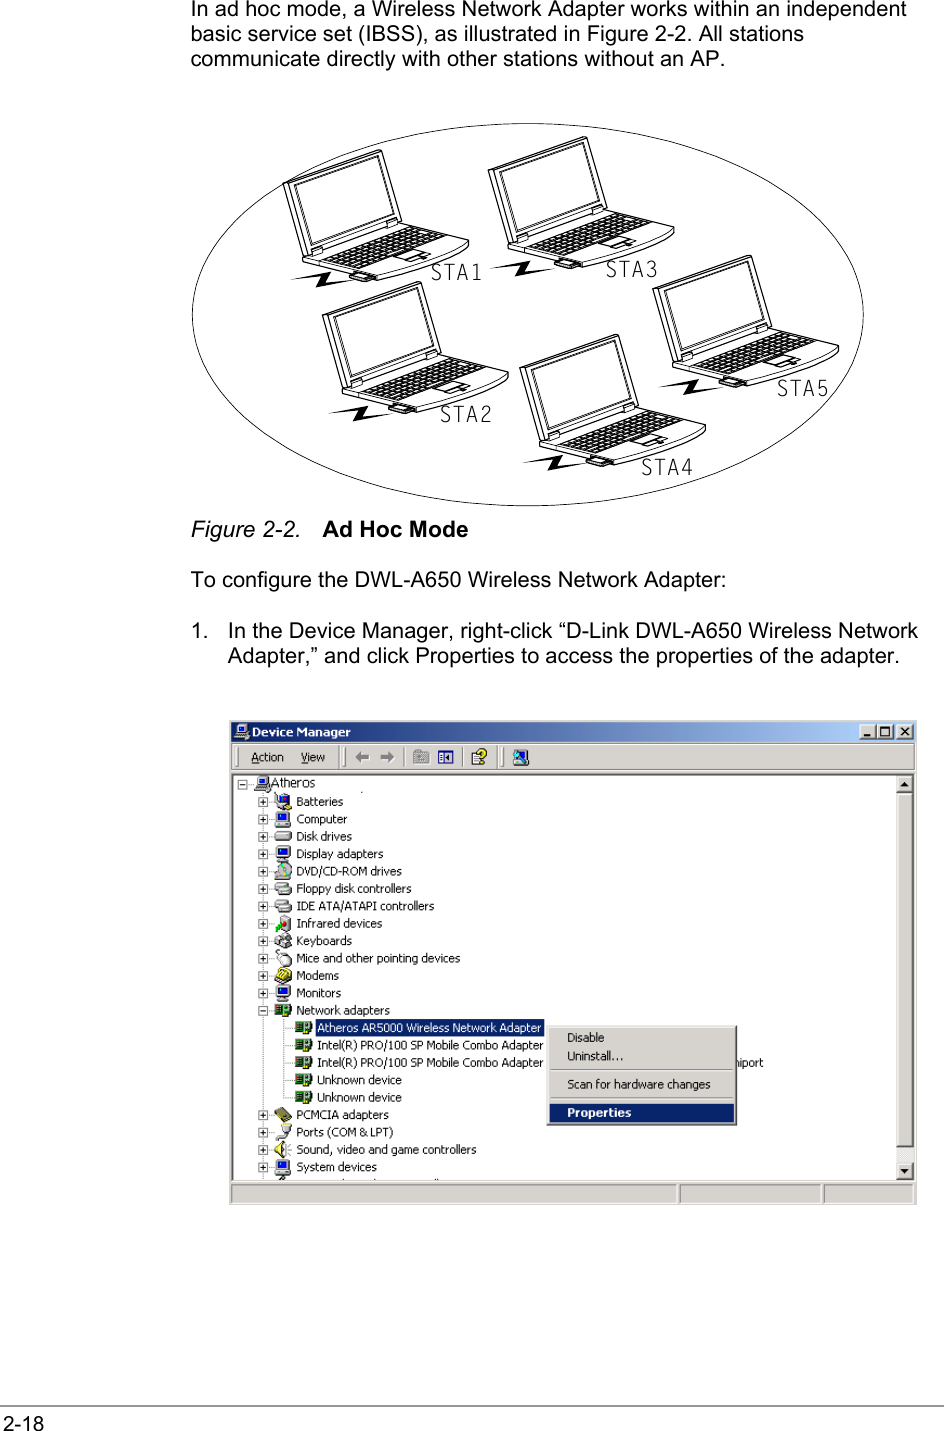  2-18 In ad hoc mode, a Wireless Network Adapter works within an independent basic service set (IBSS), as illustrated in Figure 2-2. All stations communicate directly with other stations without an AP.  STA1STA2STA3STA4STA5 Figure 2-2.  Ad Hoc Mode To configure the DWL-A650 Wireless Network Adapter: 1.  In the Device Manager, right-click “D-Link DWL-A650 Wireless Network Adapter,” and click Properties to access the properties of the adapter.   